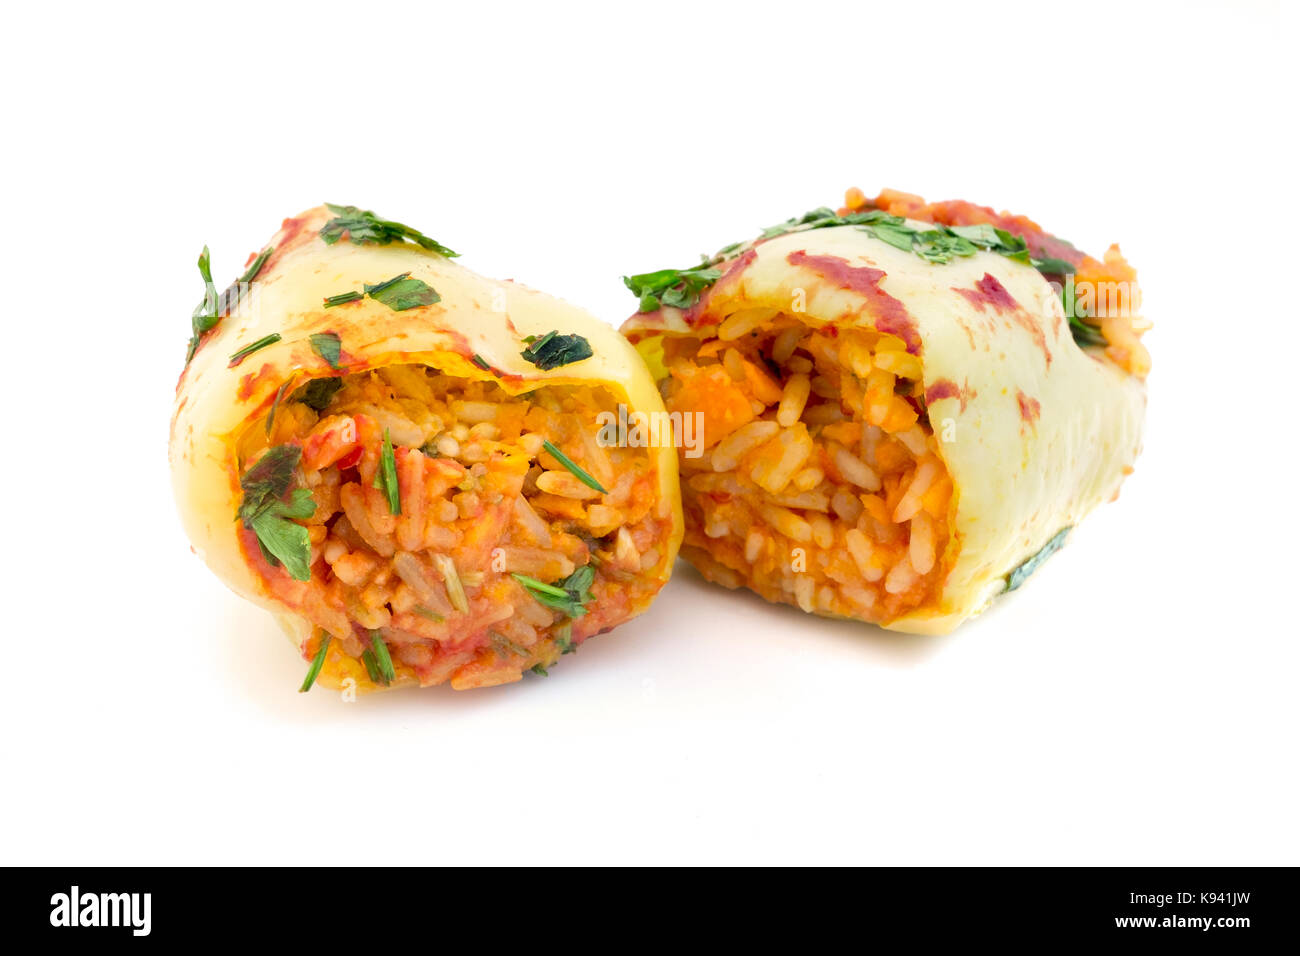 Georgian fasting tolma (stuffed pepper filled with rice) on a white background Stock Photo